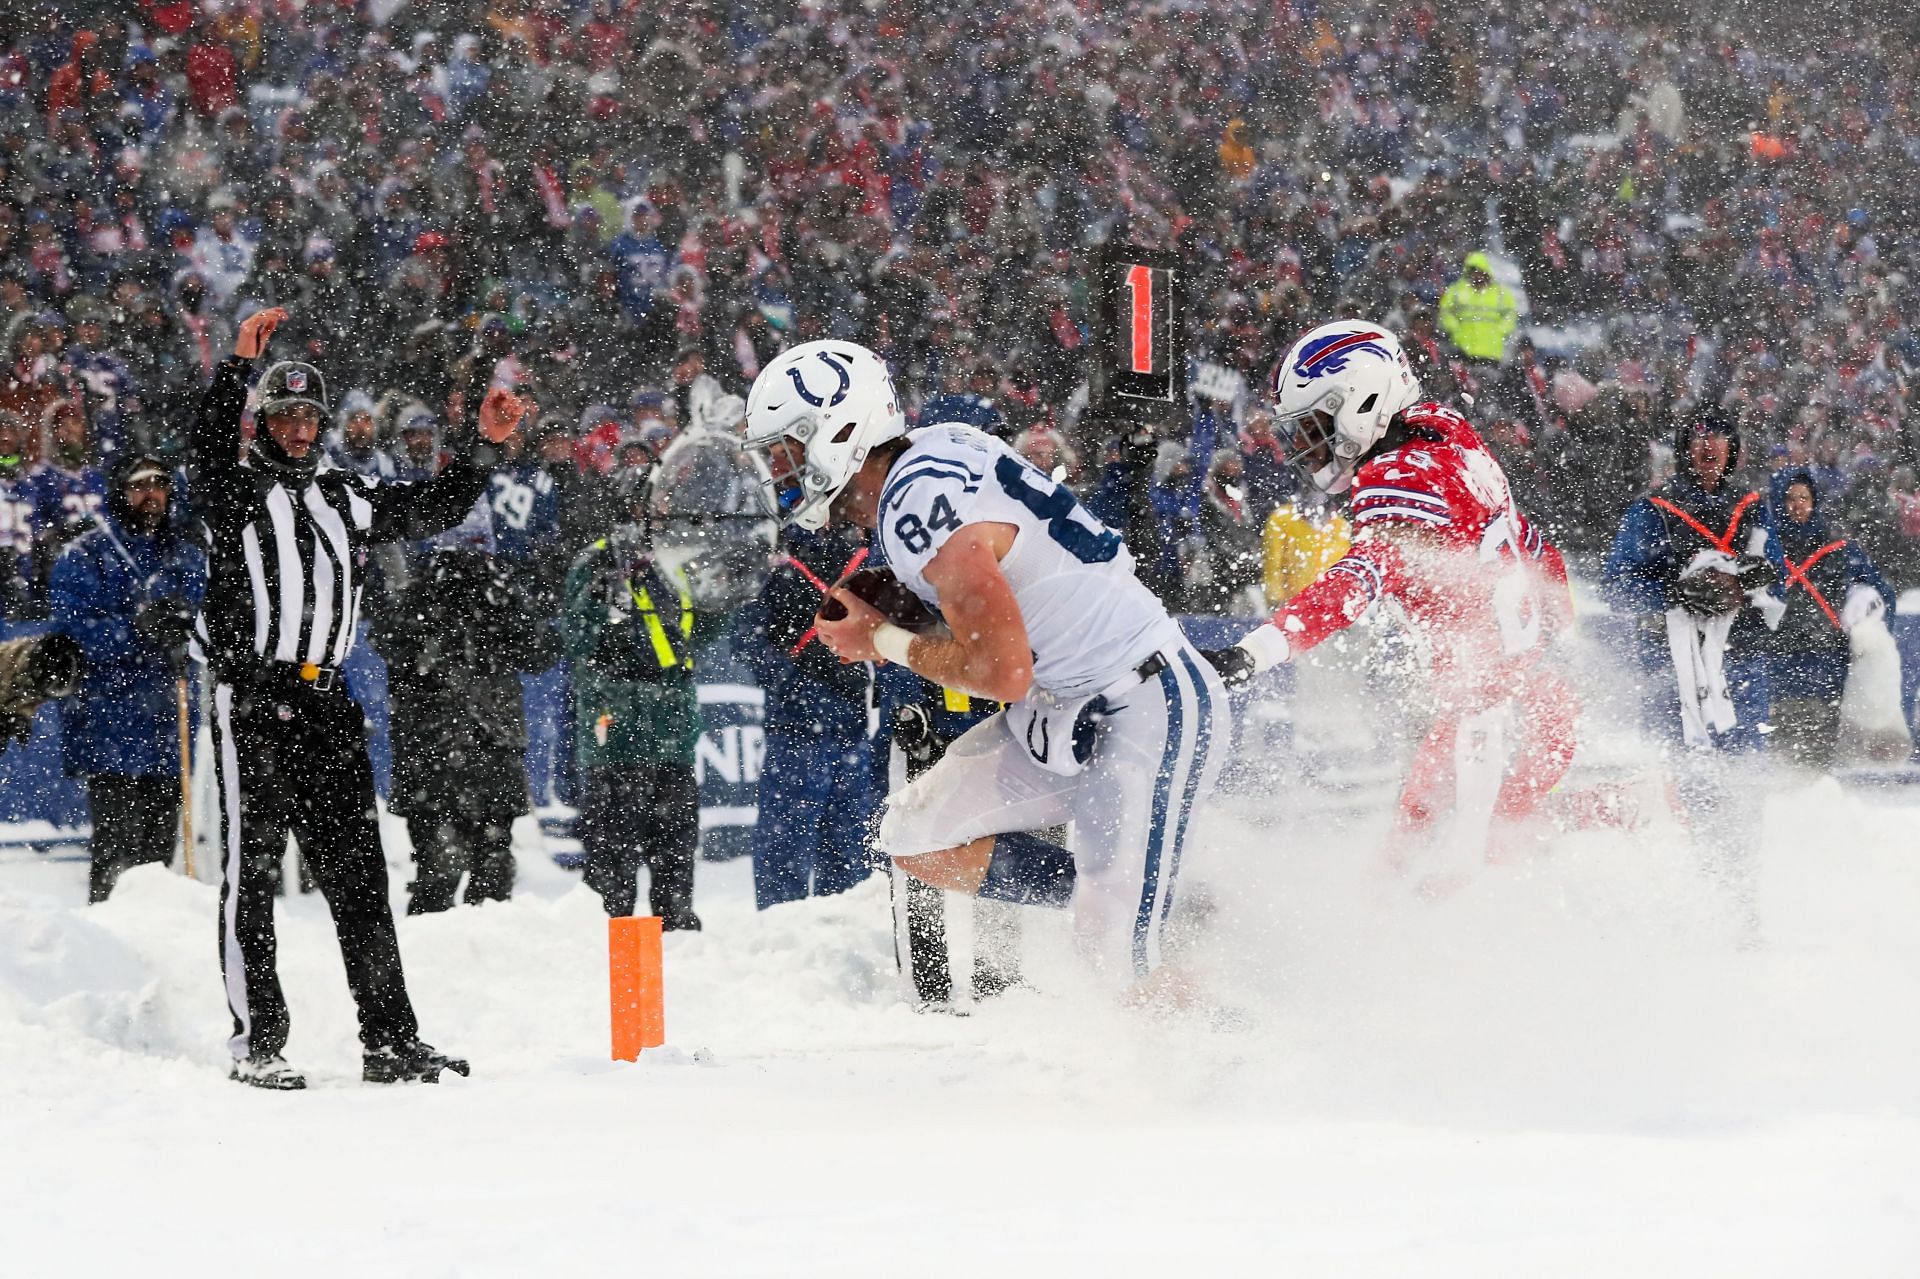 When was the last time the NFL played Christmas Games on a Sunday?